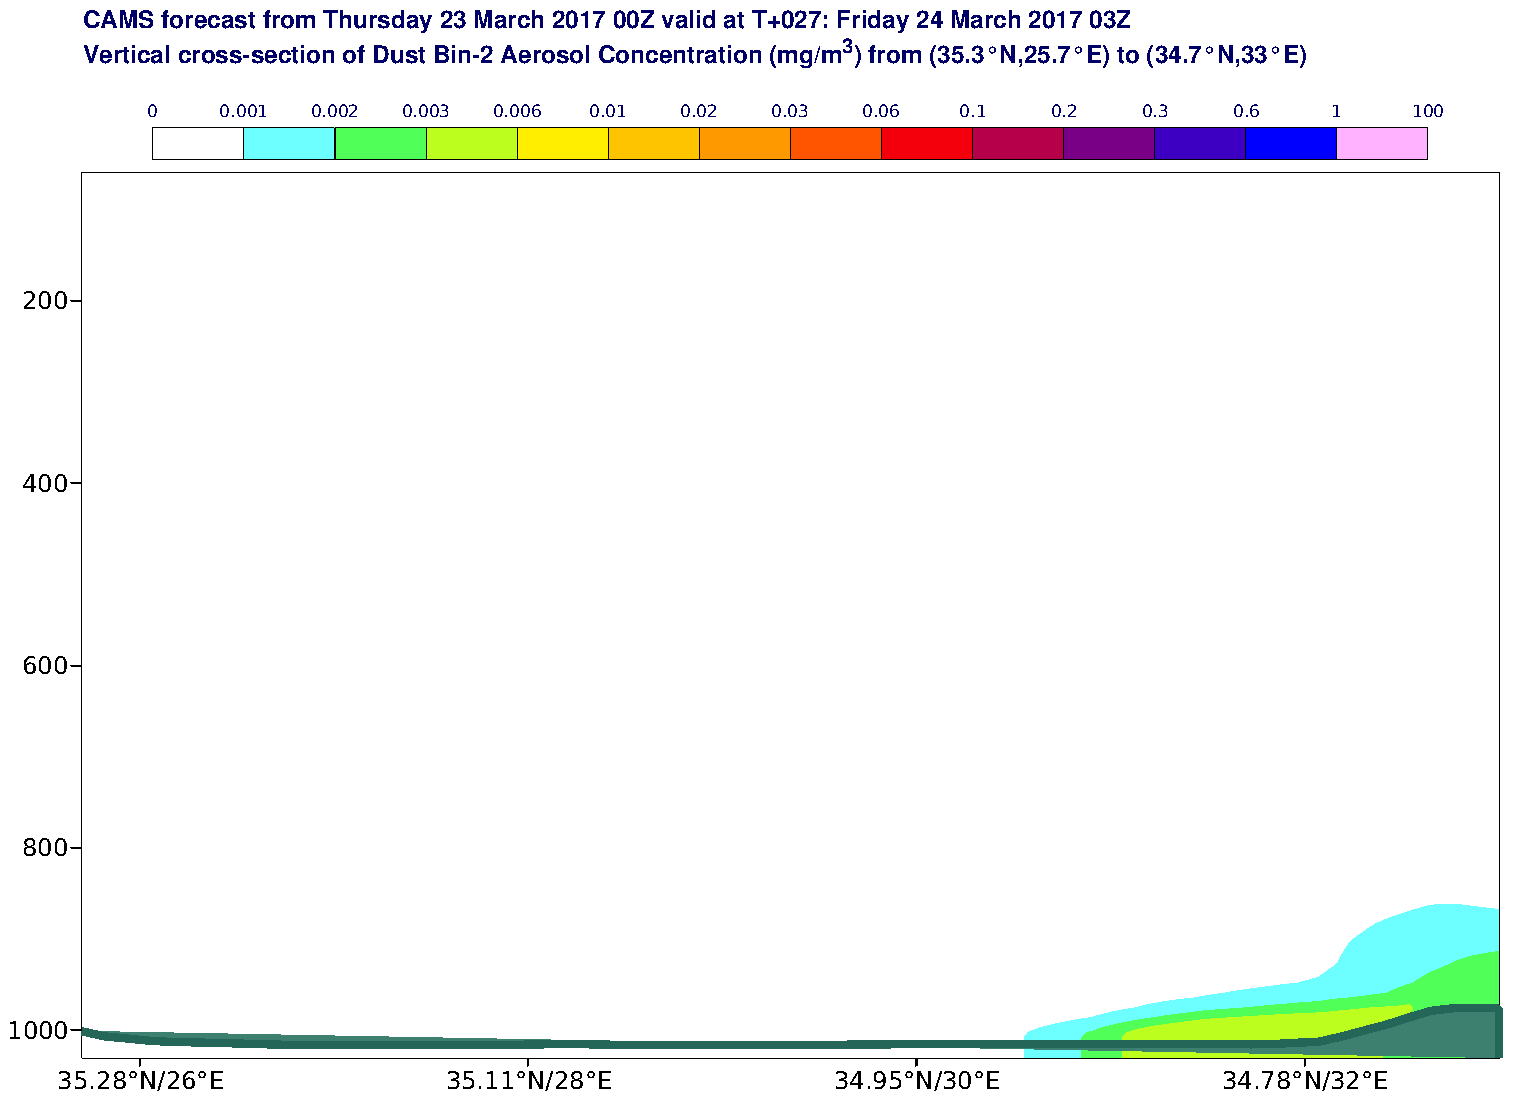 Vertical cross-section of Dust Bin-2 Aerosol Concentration (mg/m3) valid at T27 - 2017-03-24 03:00